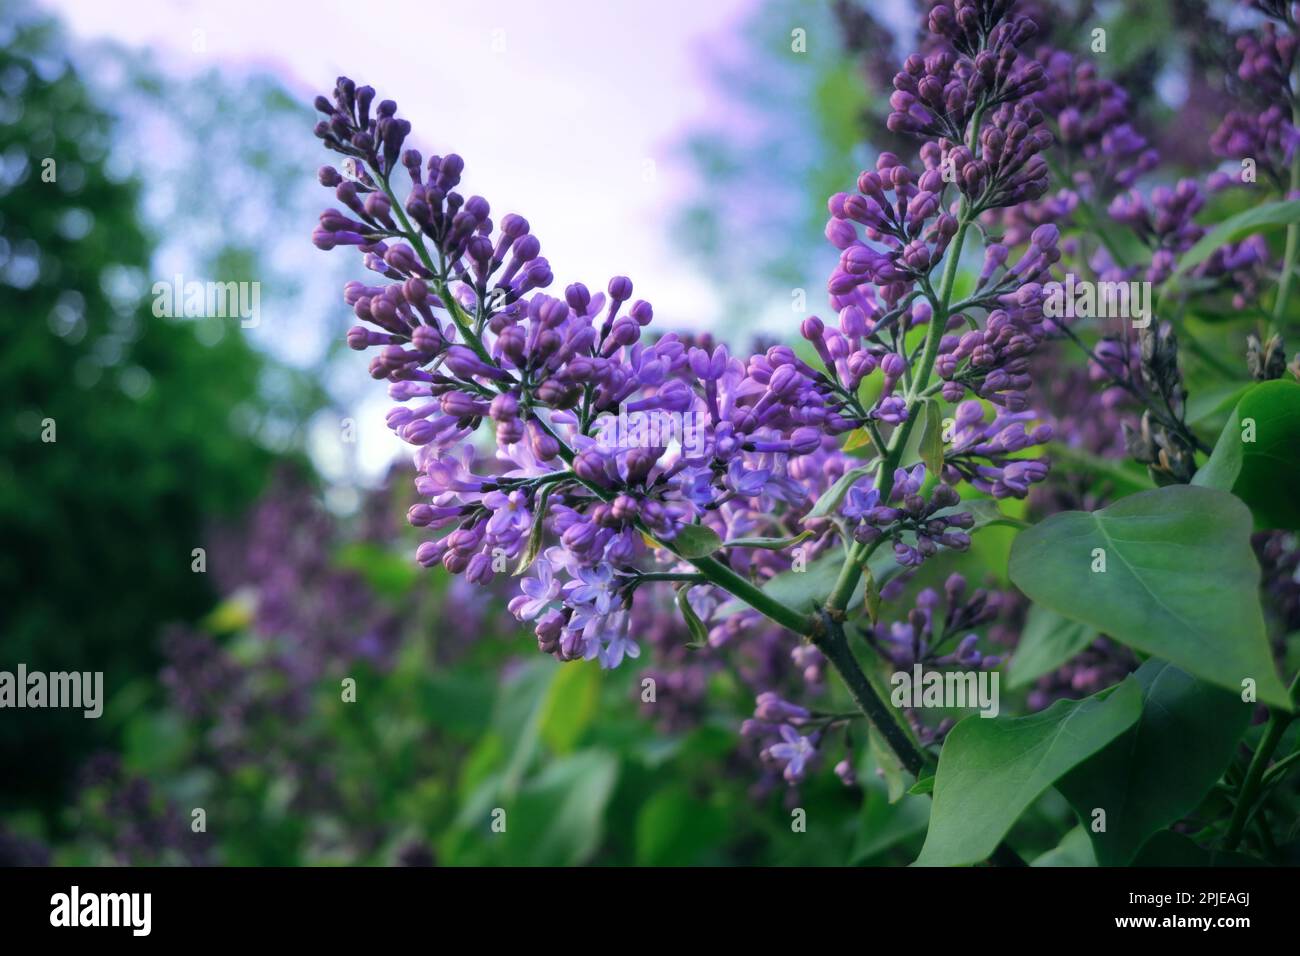 Purple lilacs, Syringa spp, close up growing in the garden on a day of early summer. Stock Photo